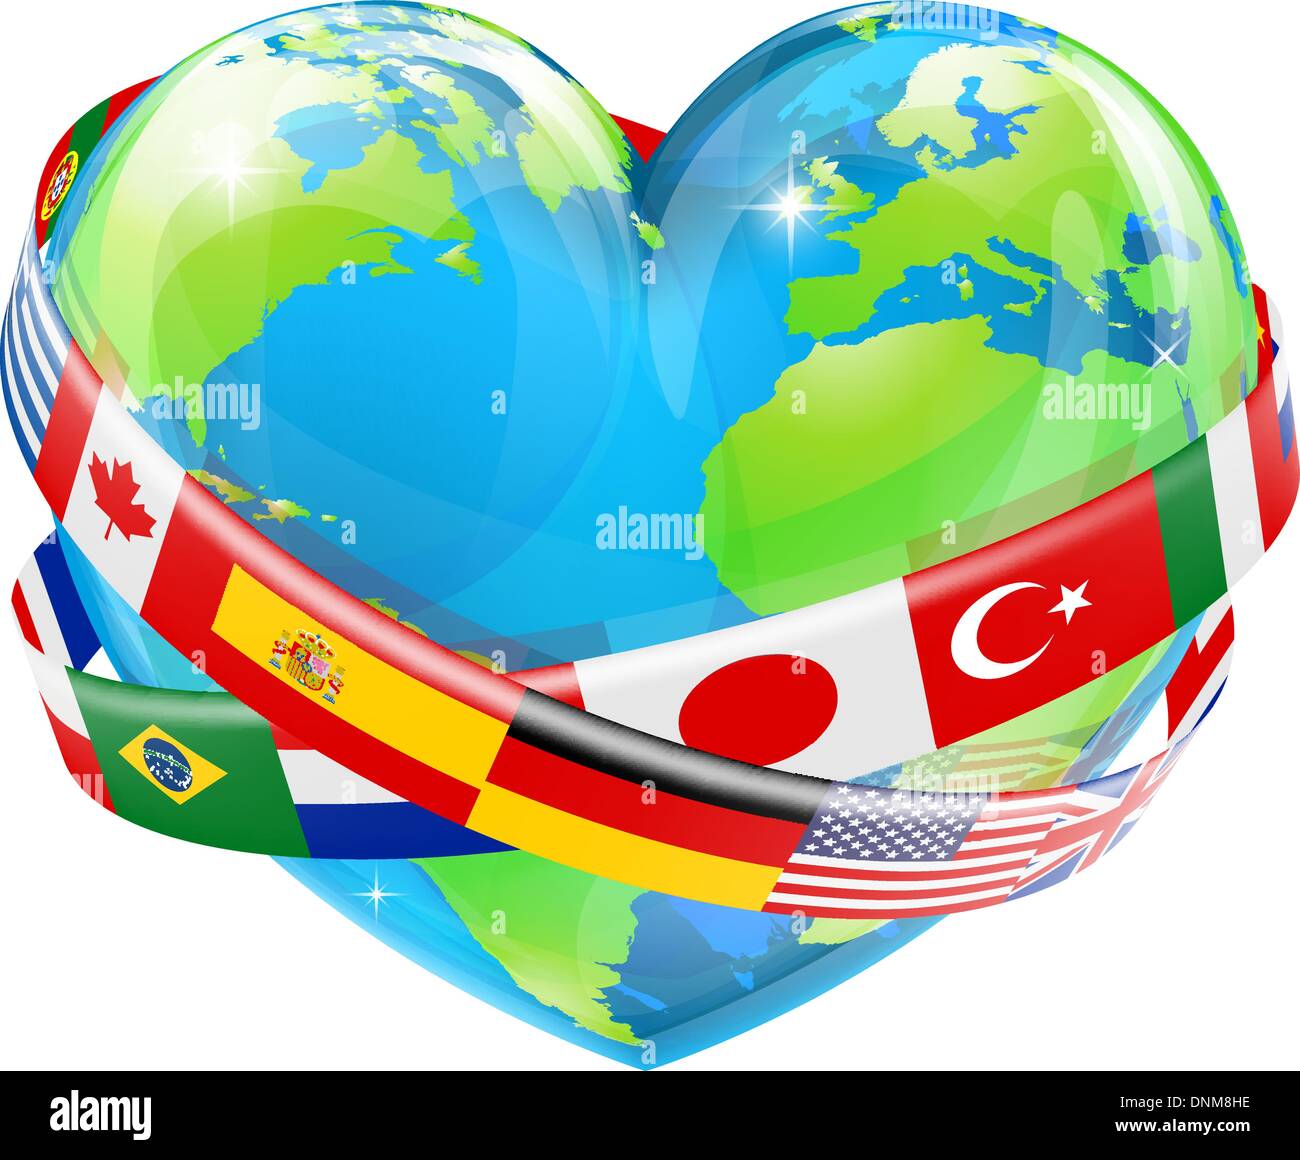 An illustration of a heart shaped world earth globe with the flags of many different countries flying around it. Stock Vector